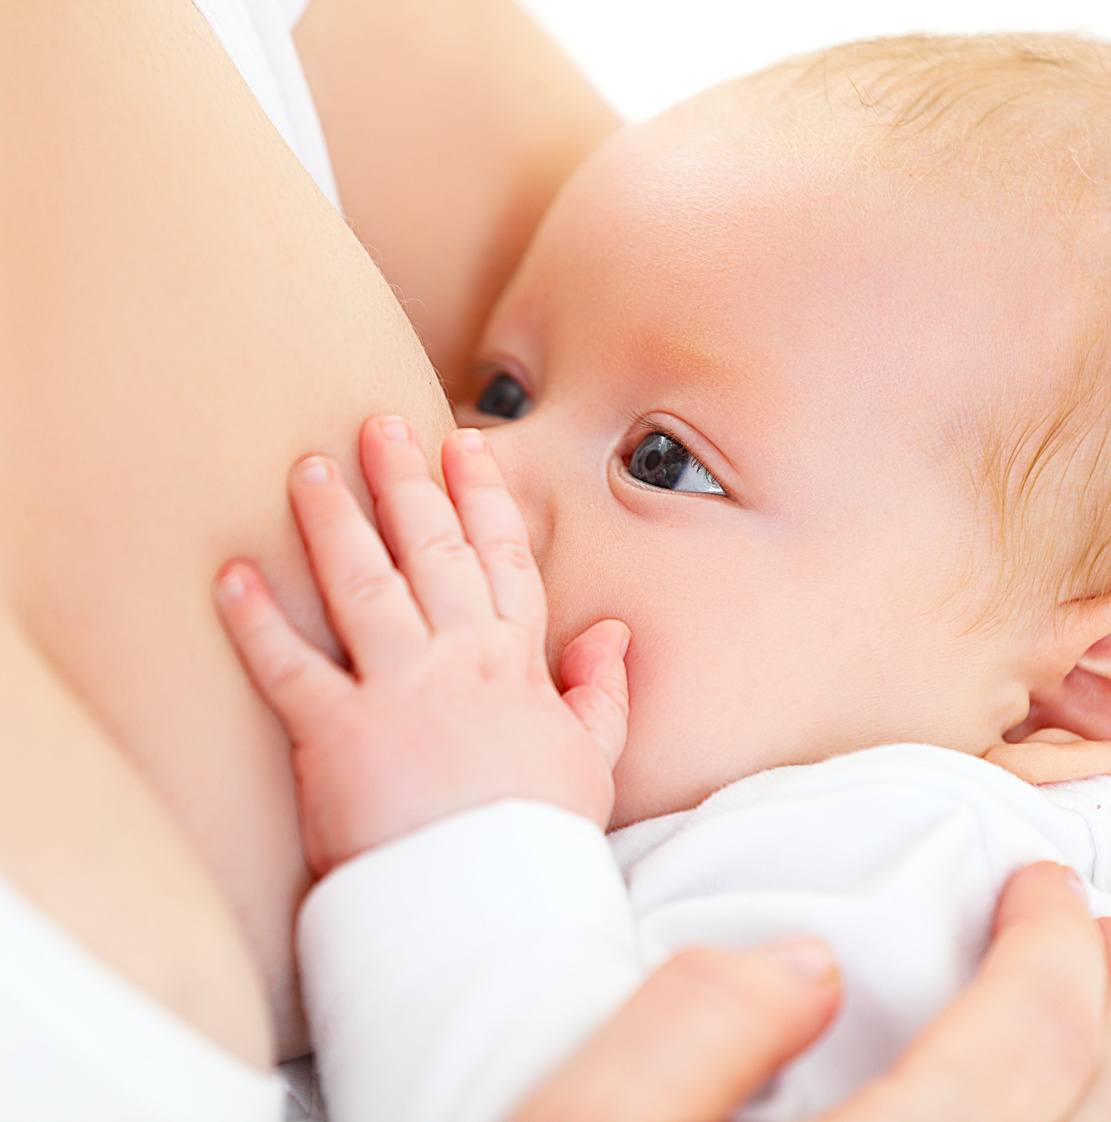 Breastfeeding education and counseling